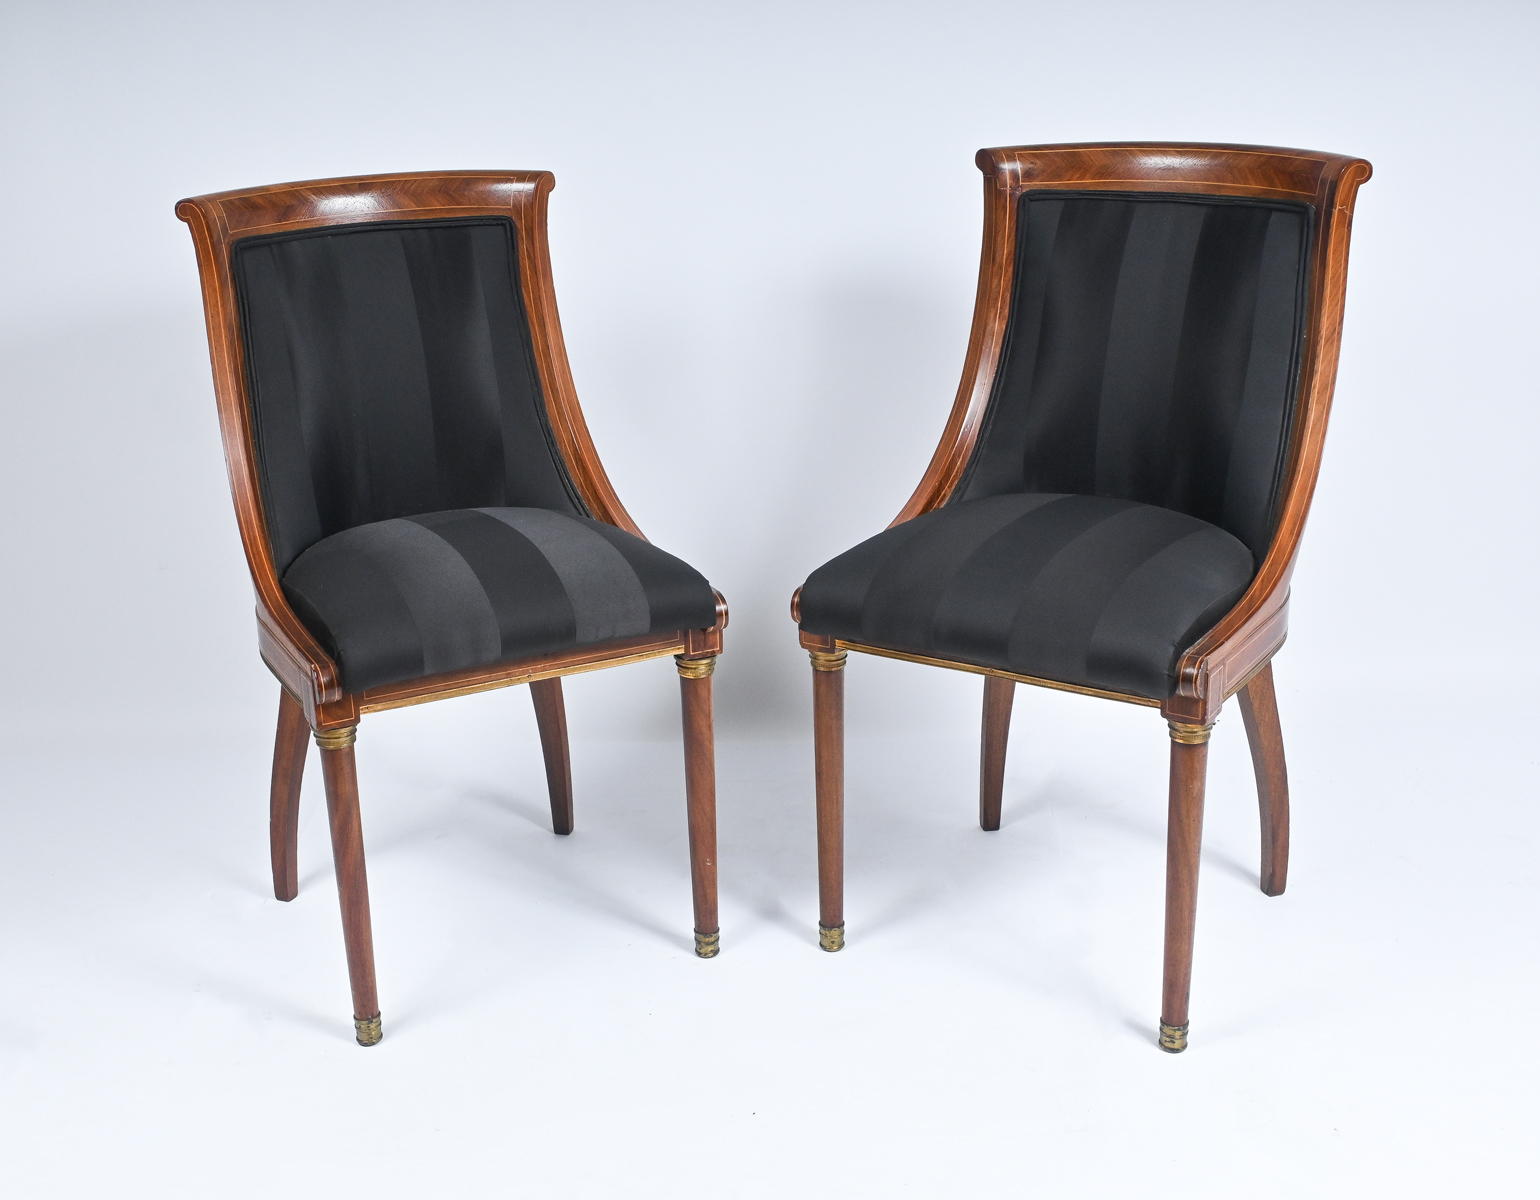 PAIR OF INLAID FRENCH DIRECTOIRE